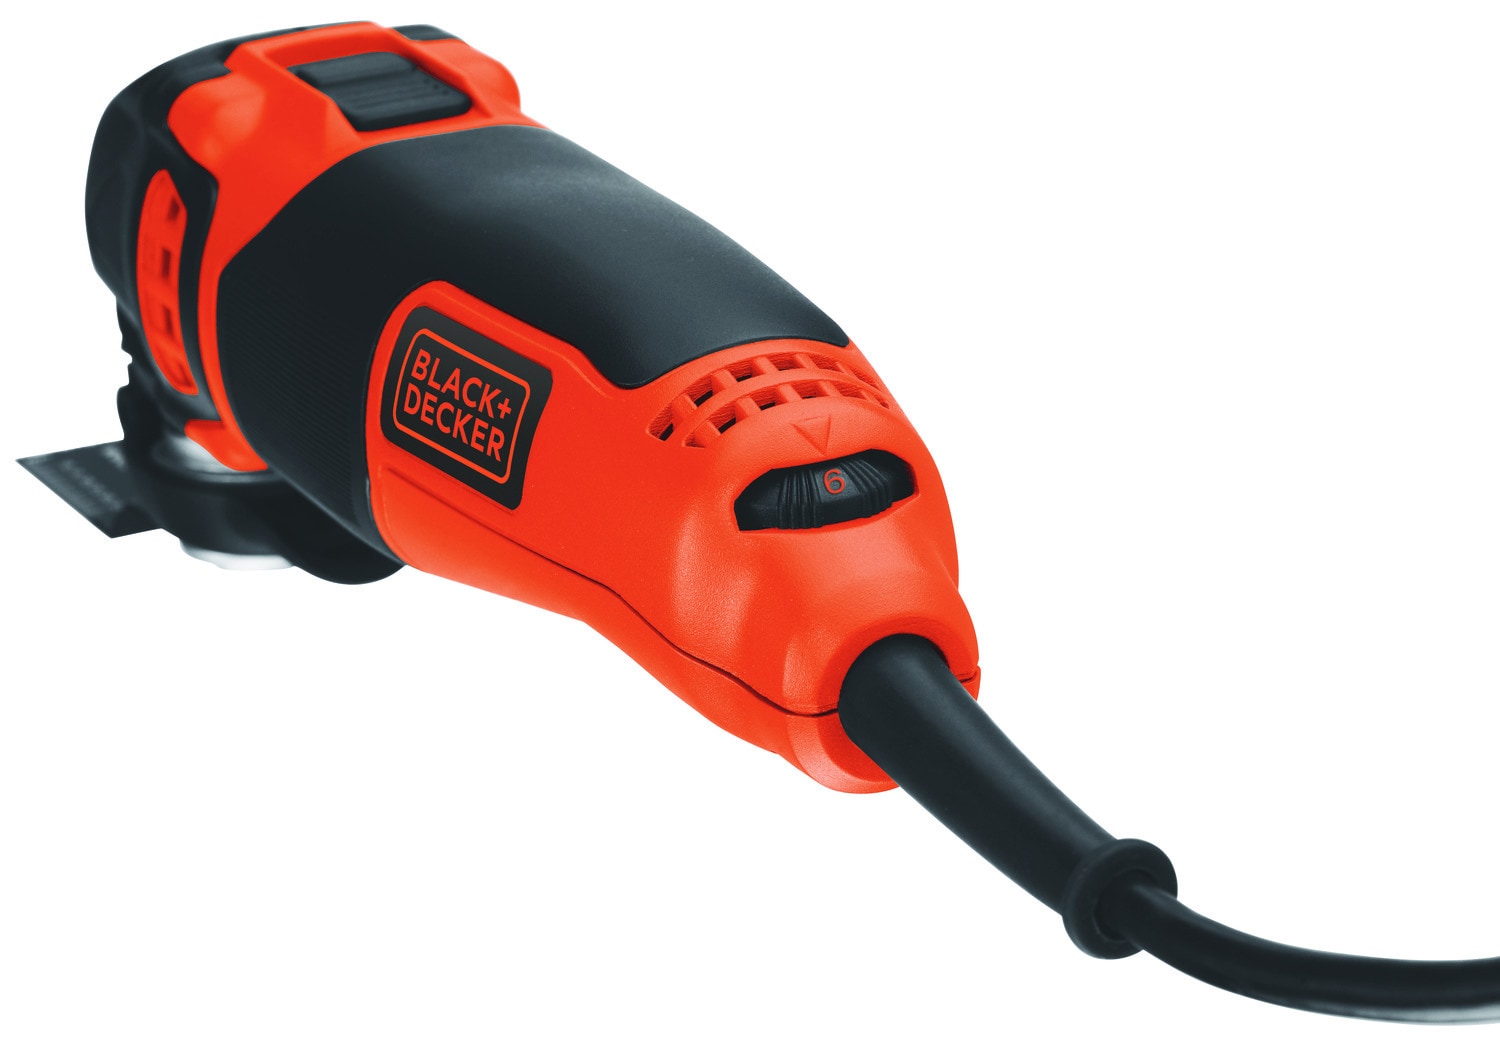 BLACK+DECKER 13-Piece 2.5-Amp Variable Speed Oscillating Multi-Tool Kit  with Soft Case at